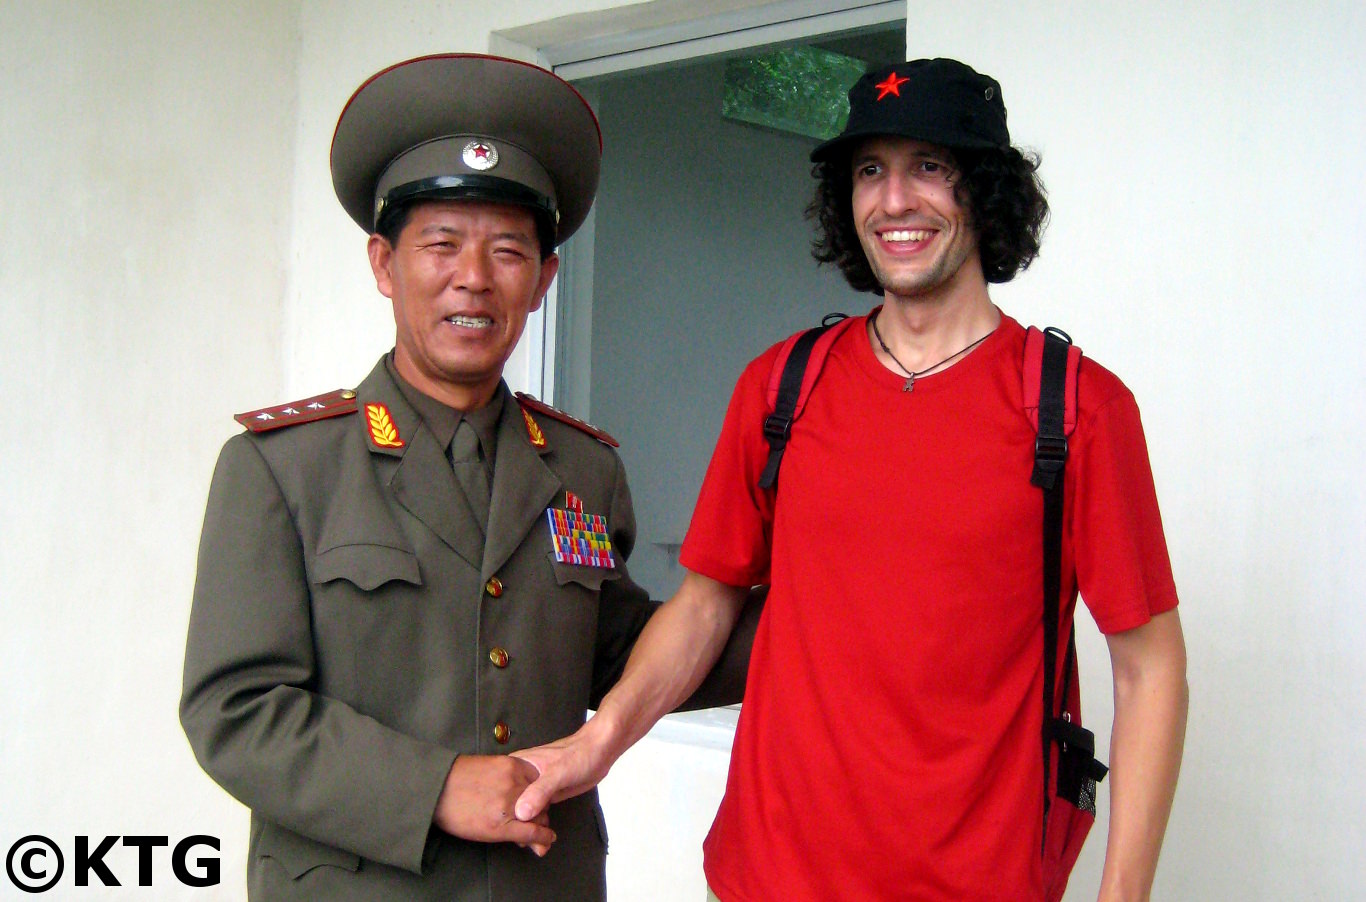 KTG traveller takes a picture with a North Koean Colonel. The (DPRK) North Korean military officer explains where South Korea have a concrete wall that strectches across the Korean peninsula